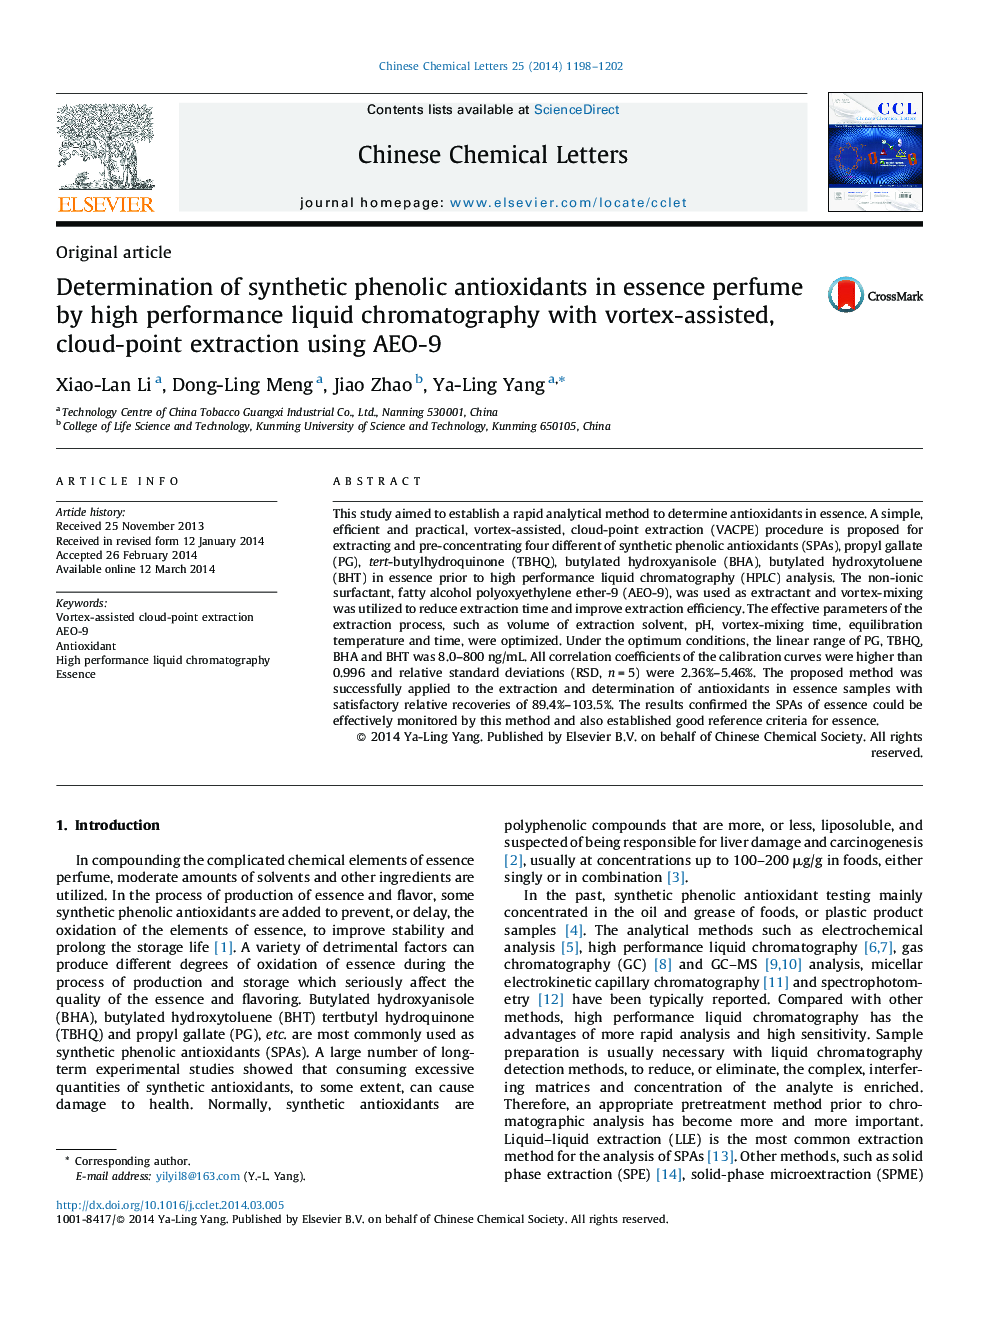 Determination of synthetic phenolic antioxidants in essence perfume by high performance liquid chromatography with vortex-assisted, cloud-point extraction using AEO-9